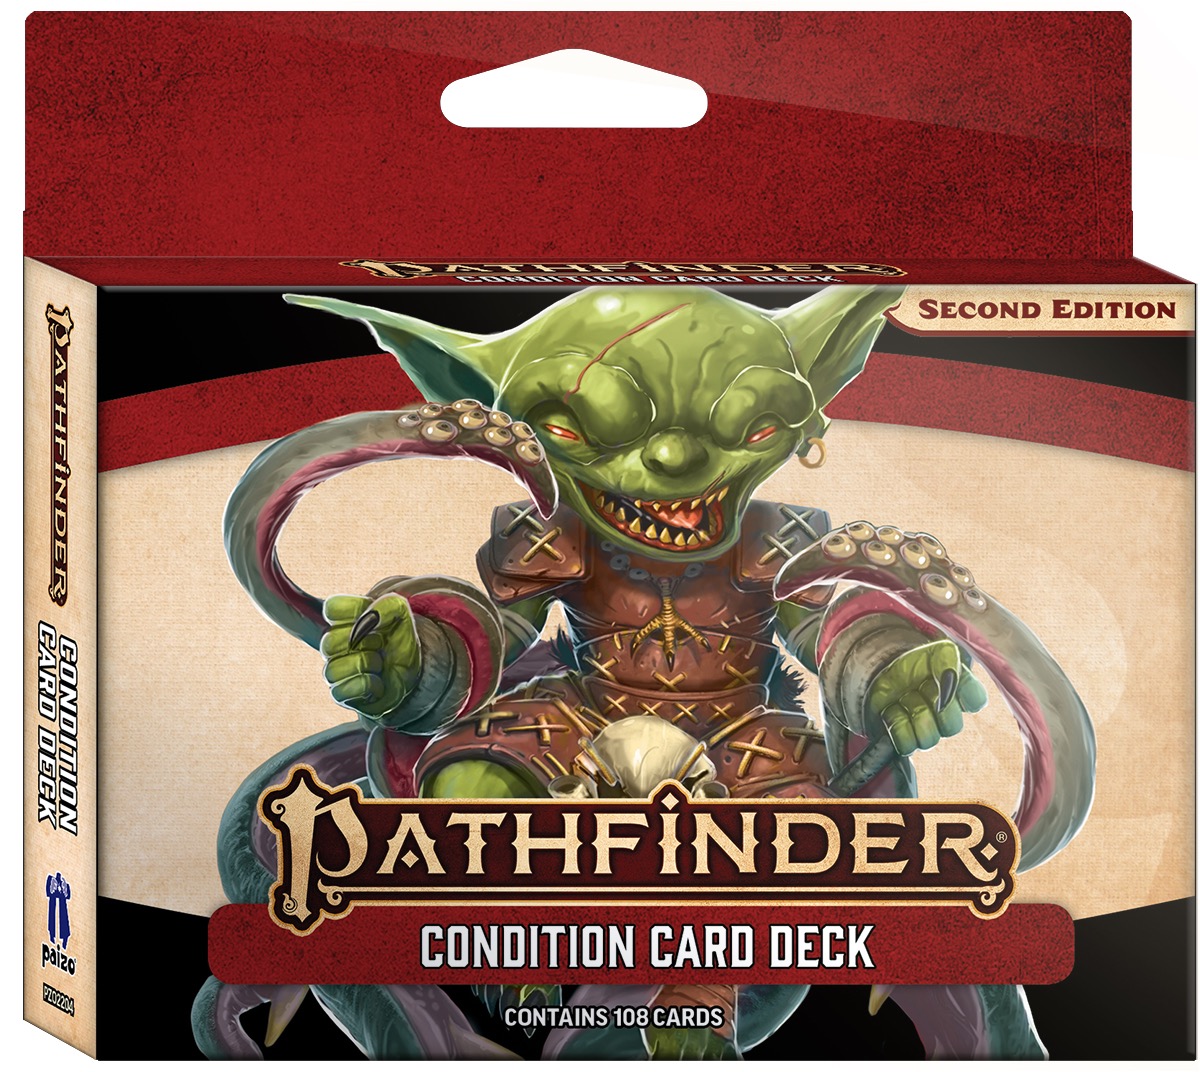 Condition Cards Pathfinder GM Cards 